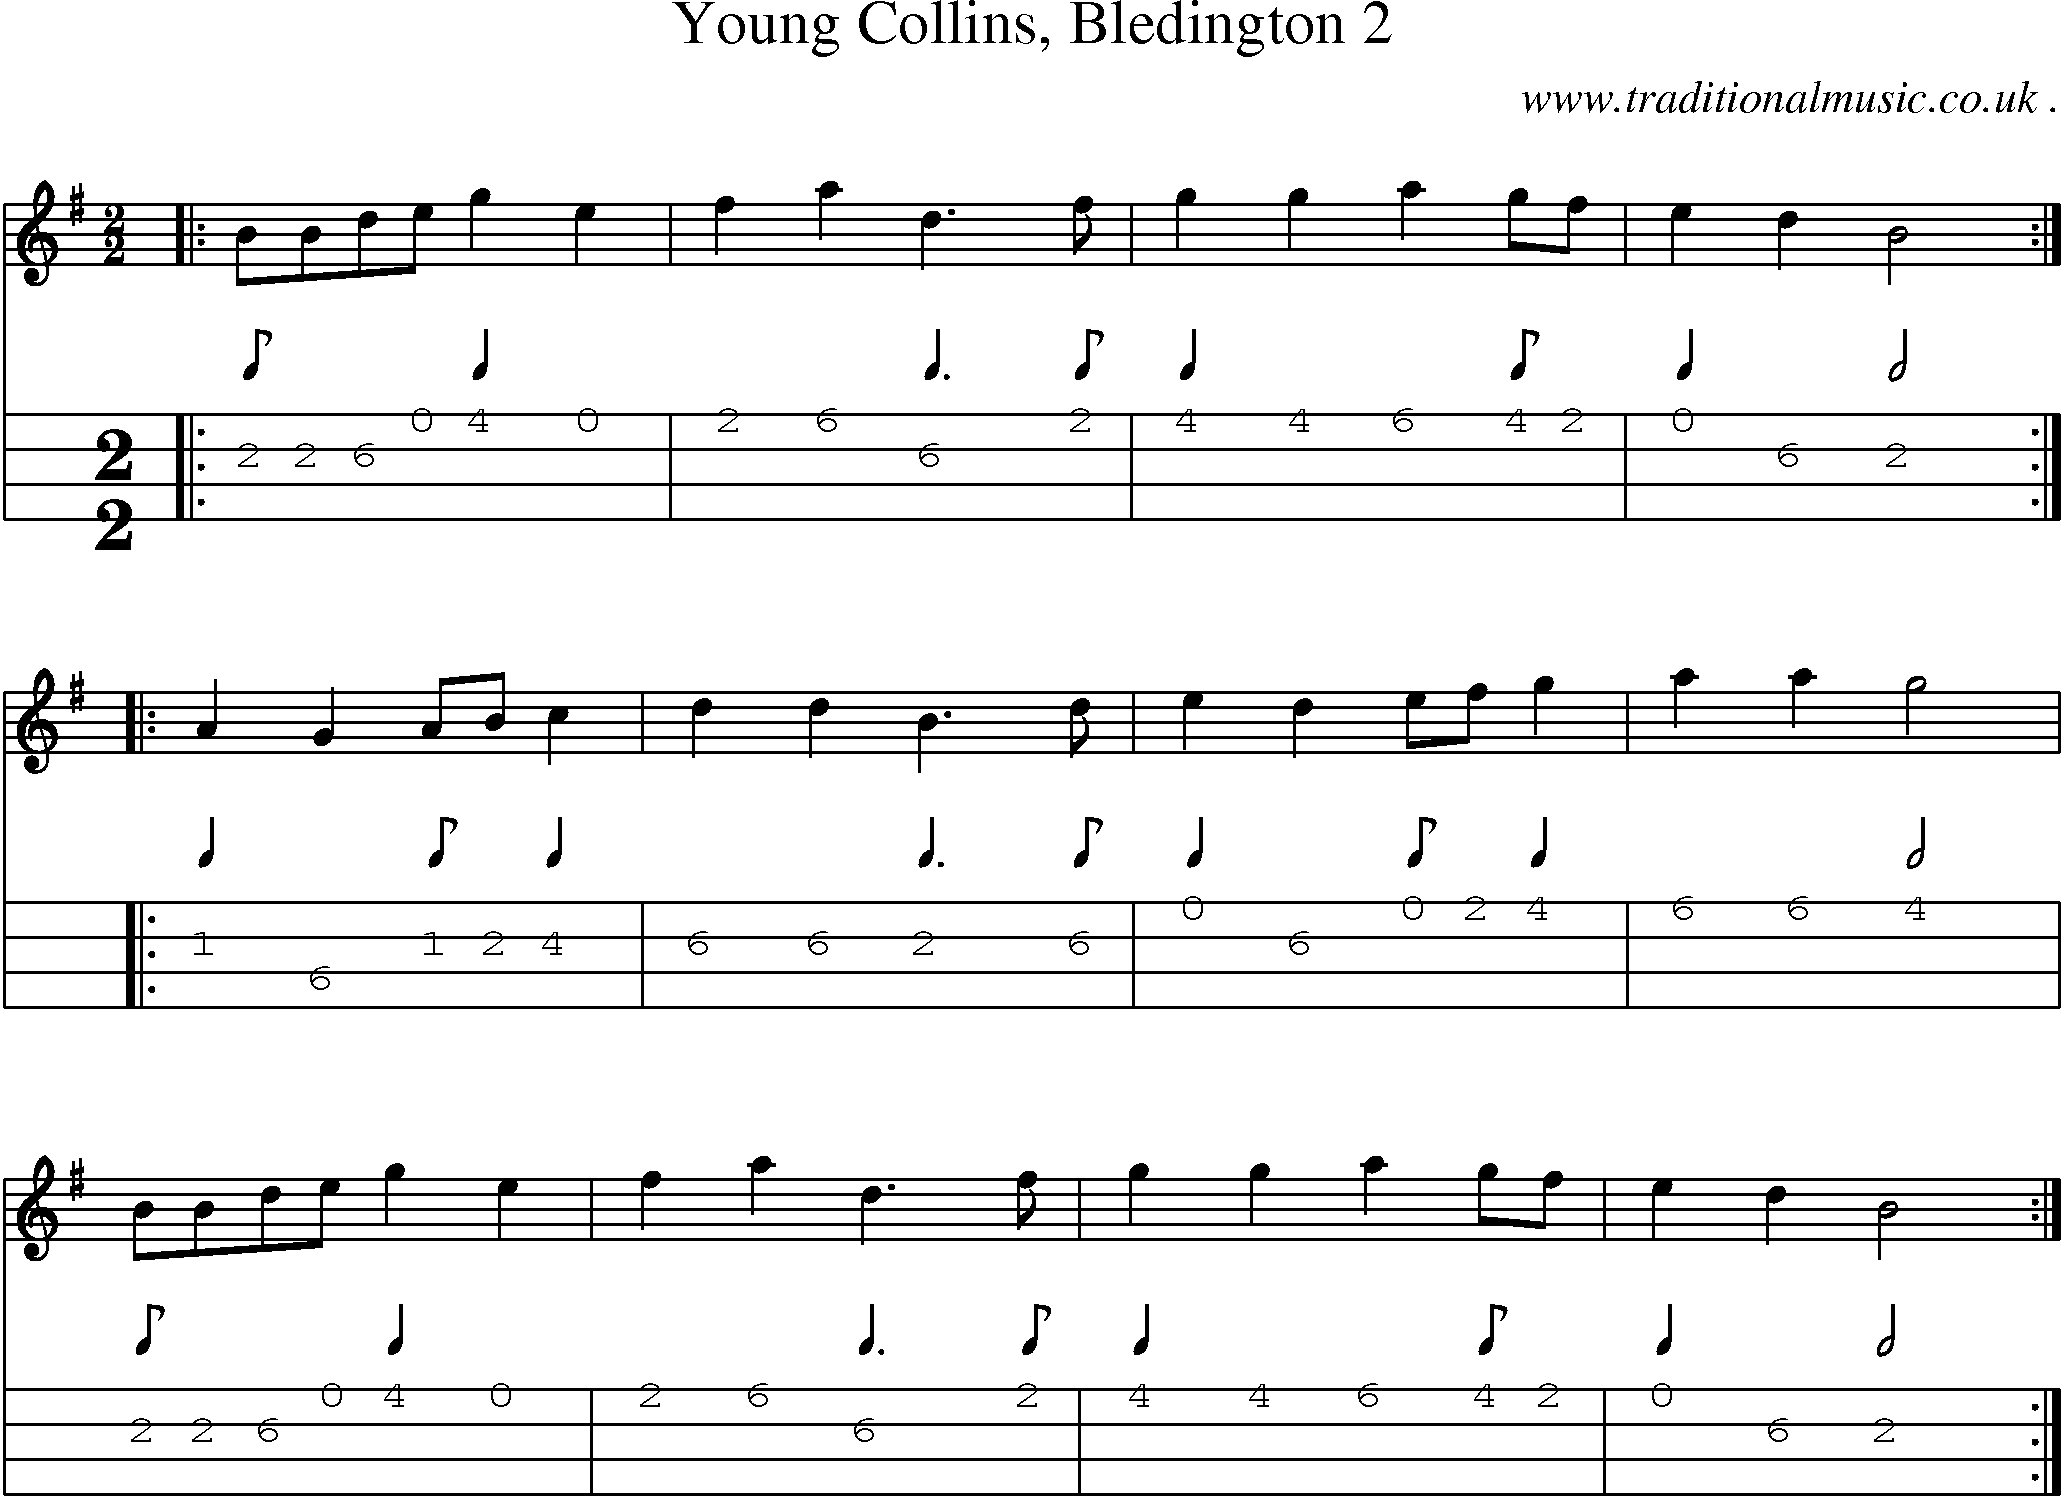 Sheet-Music and Mandolin Tabs for Young Collins Bledington 2